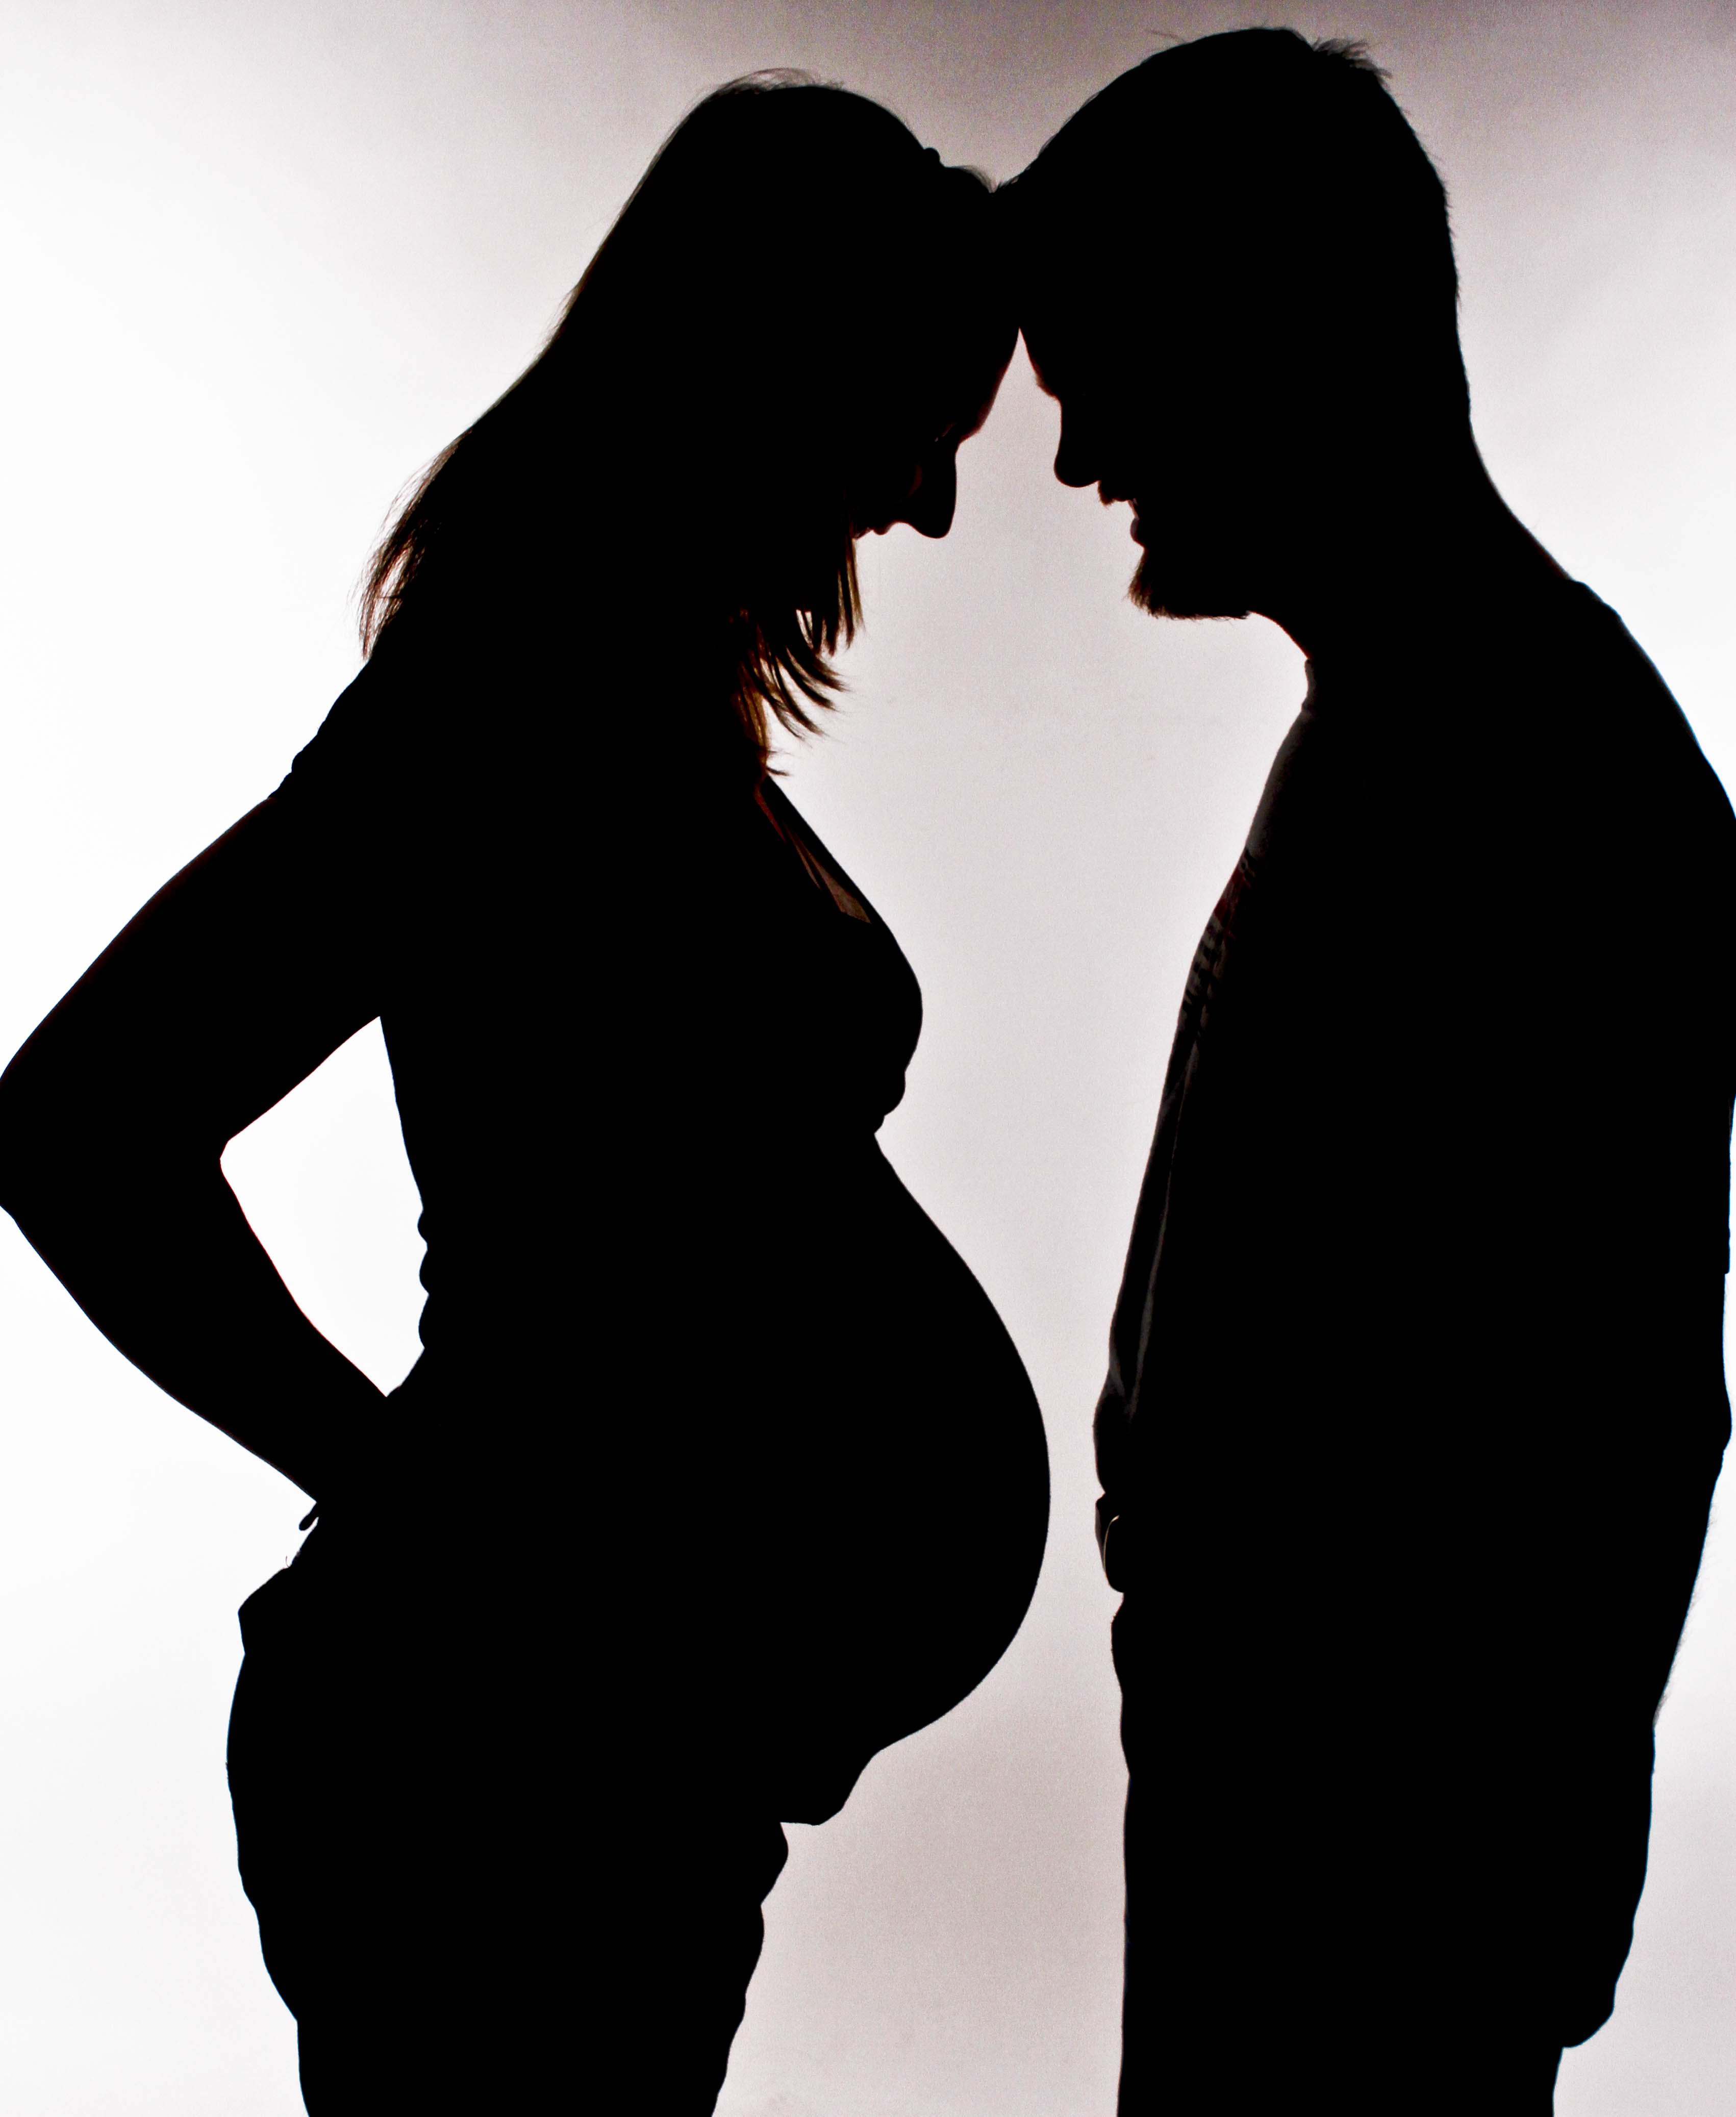 Description Silhouette Or A Pregnant Woman And Her Partner 14aug2011